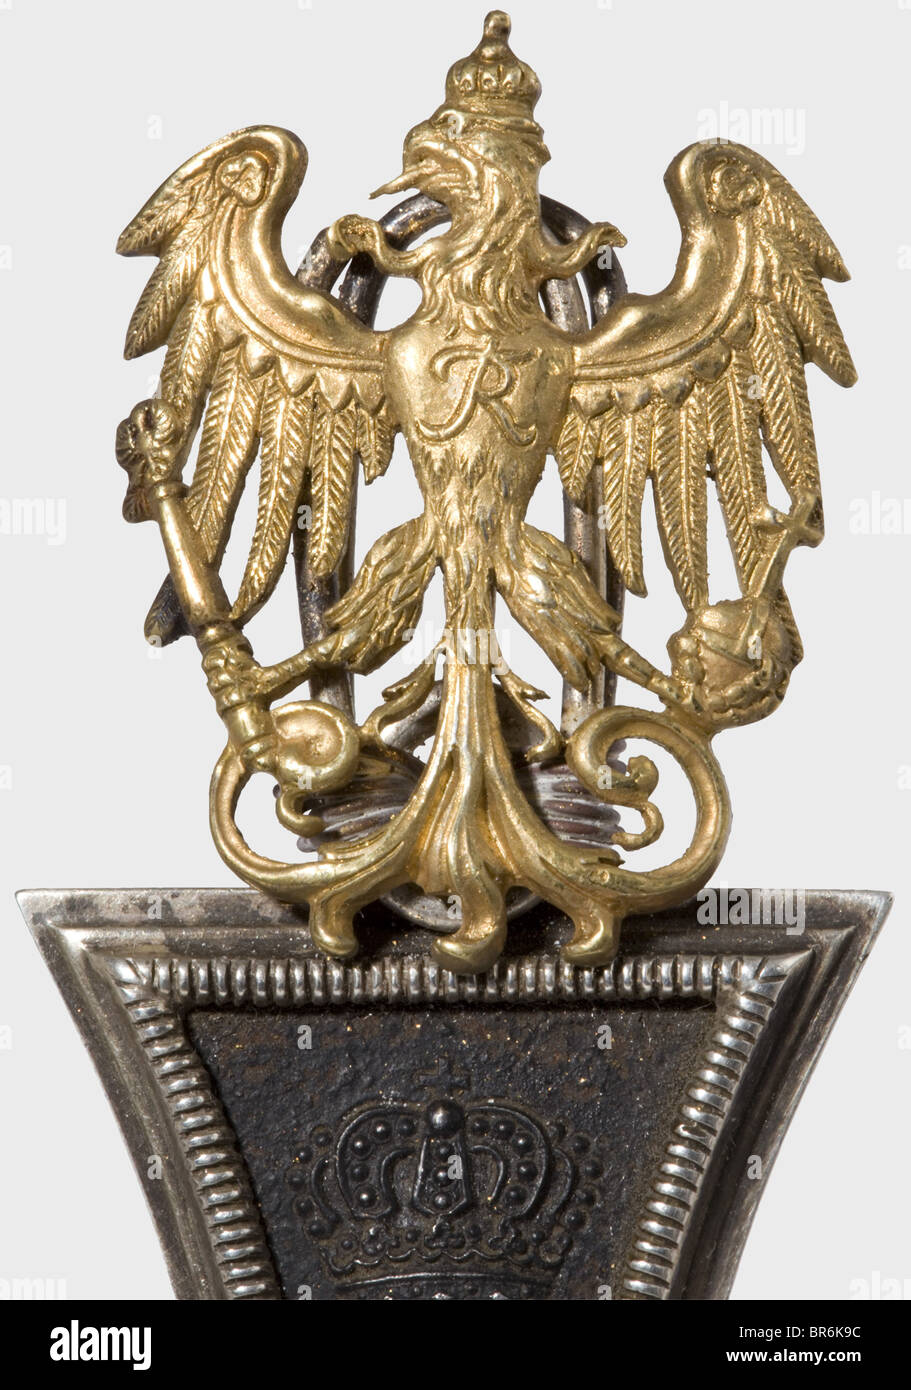 Reich President Paul von Hindenburg (1847 - 1934) - Grand Cross of the Iron Cross 1914, exemplar from the order cushion at his funeral in the Tannenberg memorial 1934. The blackened iron core is somewhat corroded, with silver frame, dimensions 62 x 62 mm. Attached to the eyelet and the suspension ring a gilt eagle appliqué of the field marshal's baton. The Grand Cross is mounted in a later frame of silver laurel branches with superimposed, gilt silver coat of arms of the von Beneckendorff and von Hindenburg family, on a small marble base. With it a letter of Pa, Stock Photo